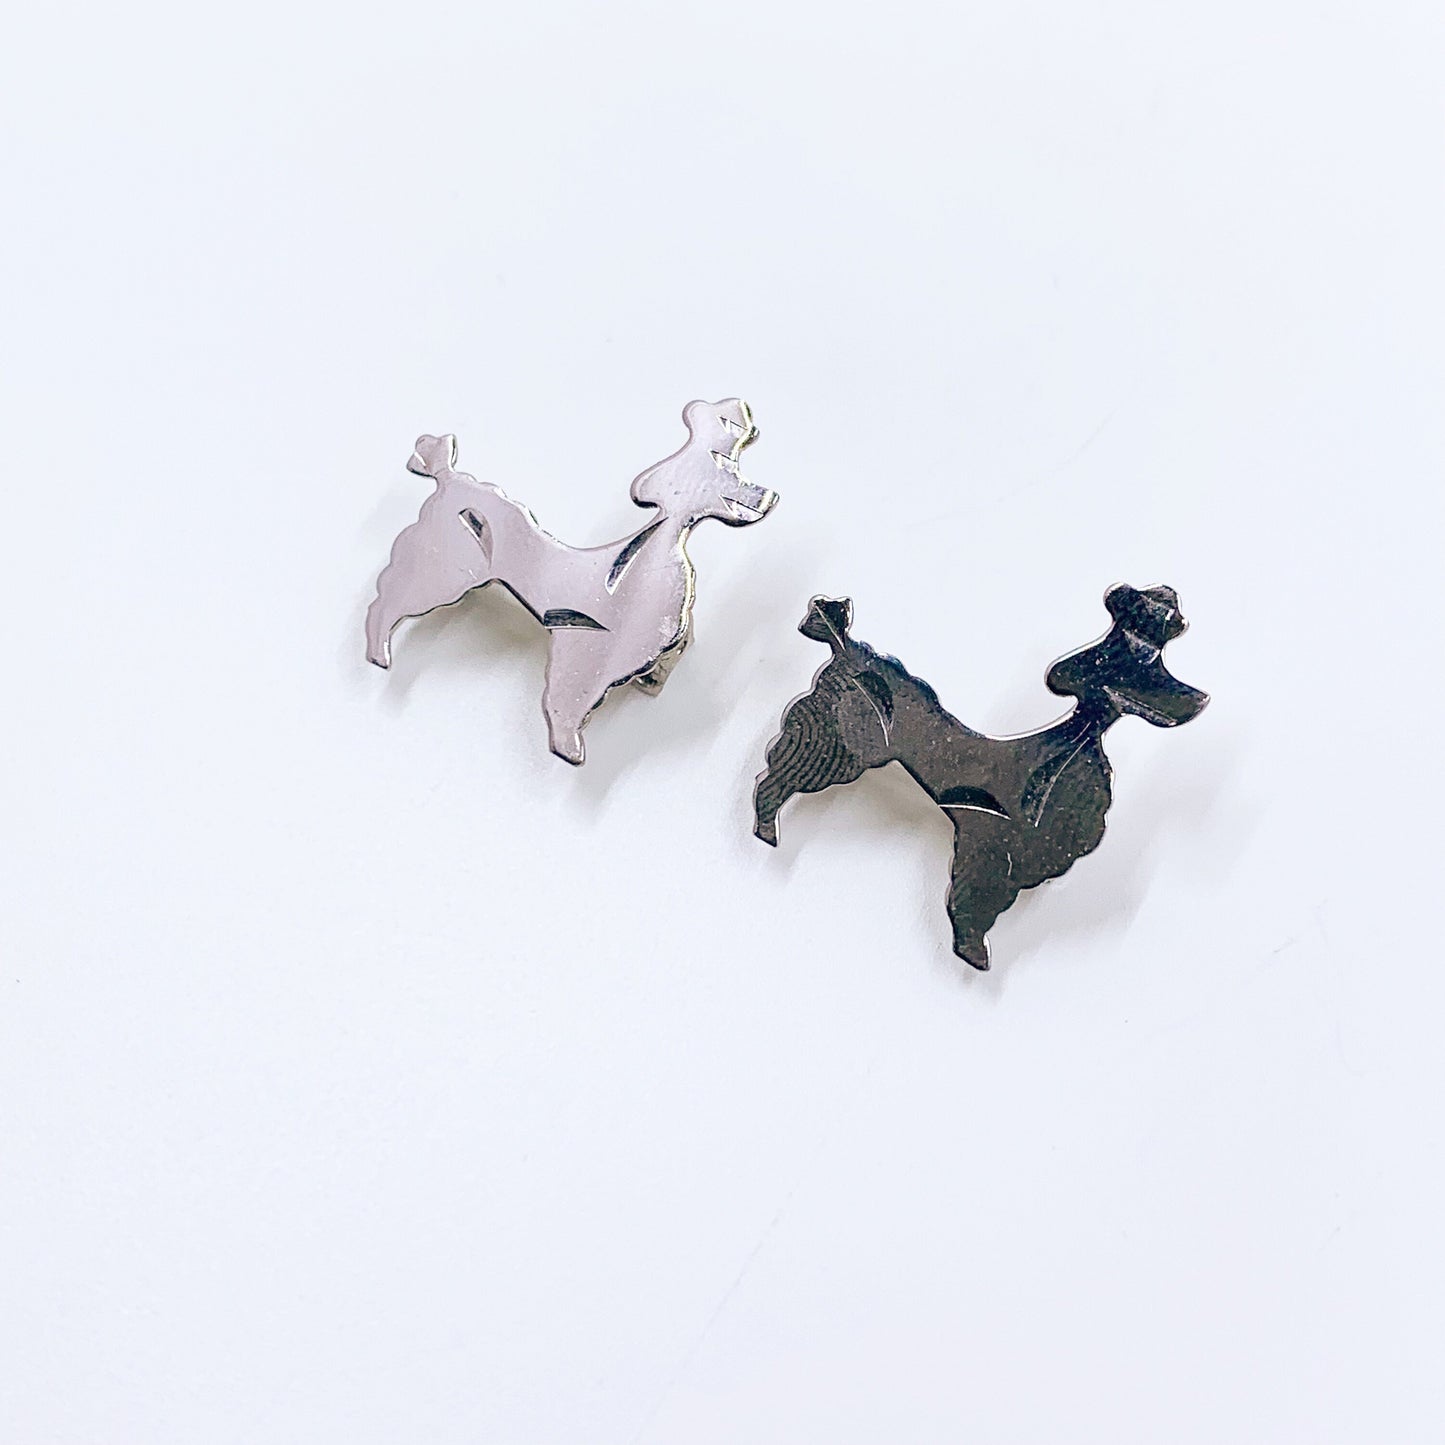 Vintage Sterling Silver Poodle Brooch Pins | Set of 2 Brooches